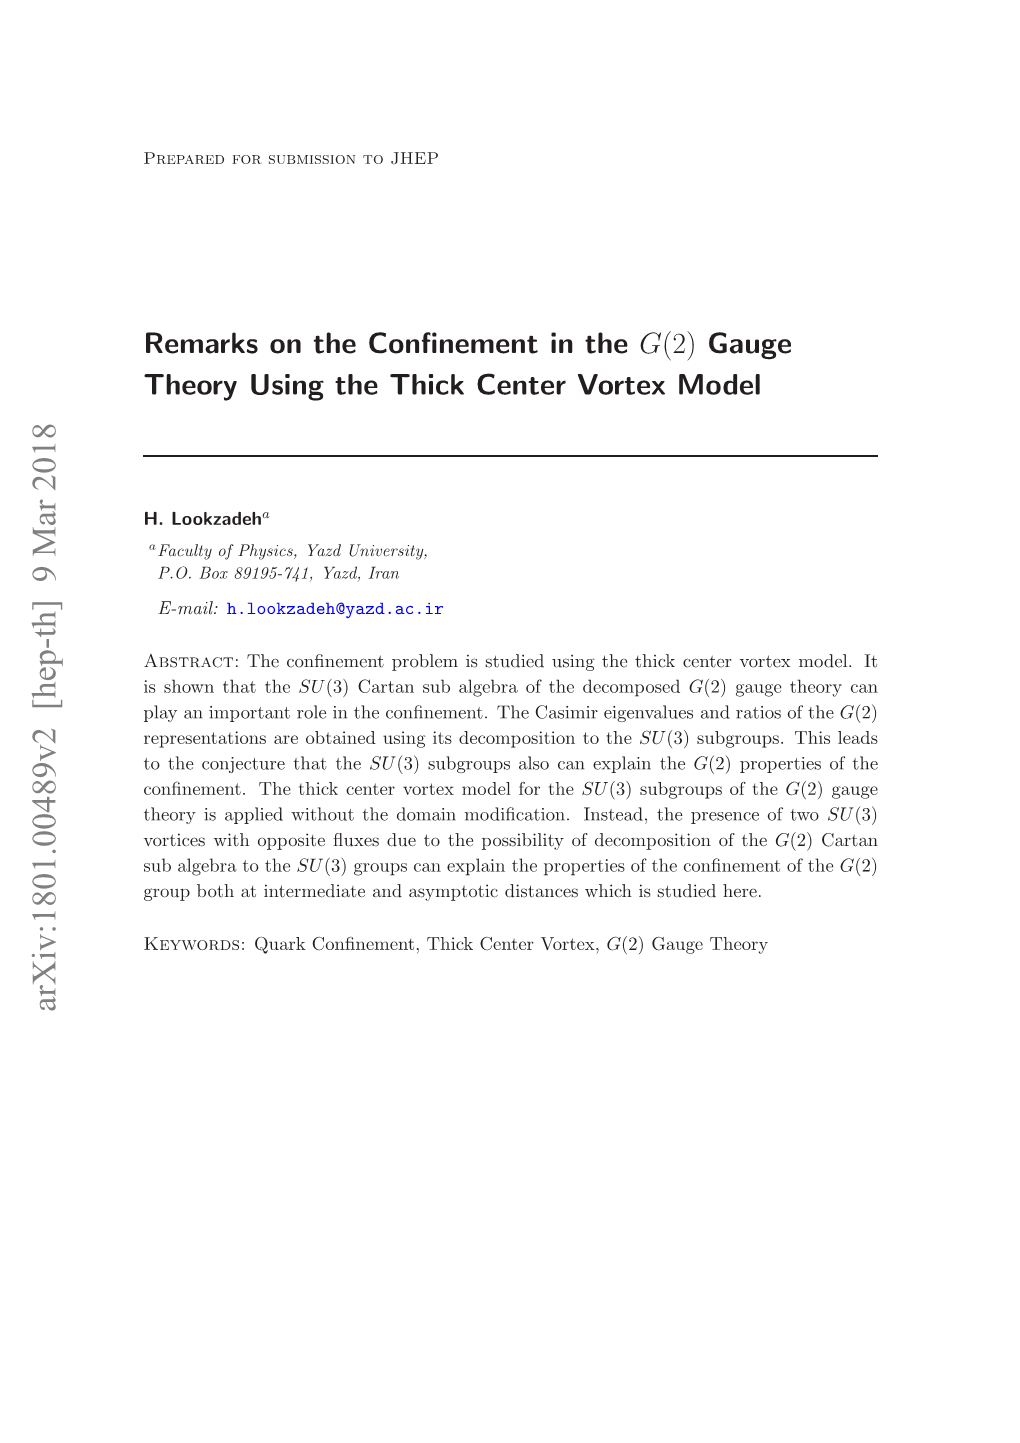 Remarks on the Confinement in the $ G (2) $ Gauge Theory Using The